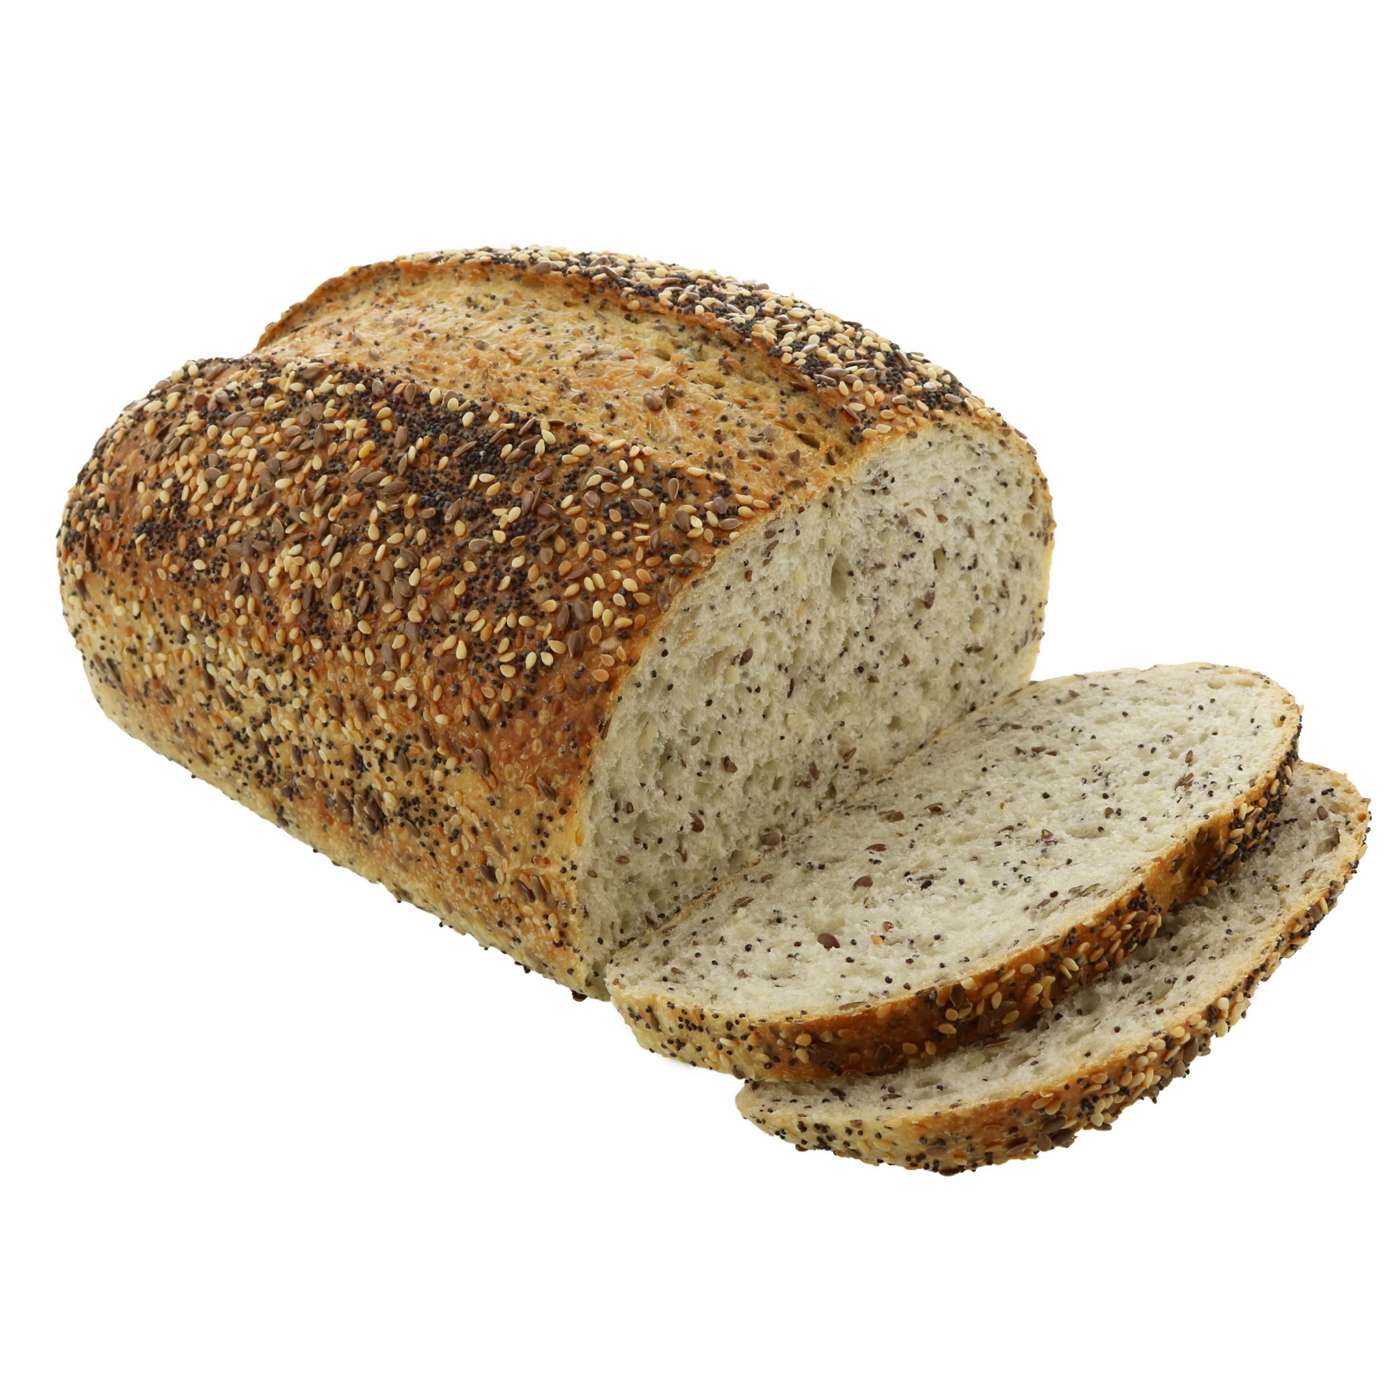 H-E-B Bakery Scratch Three Seed Bread; image 1 of 2